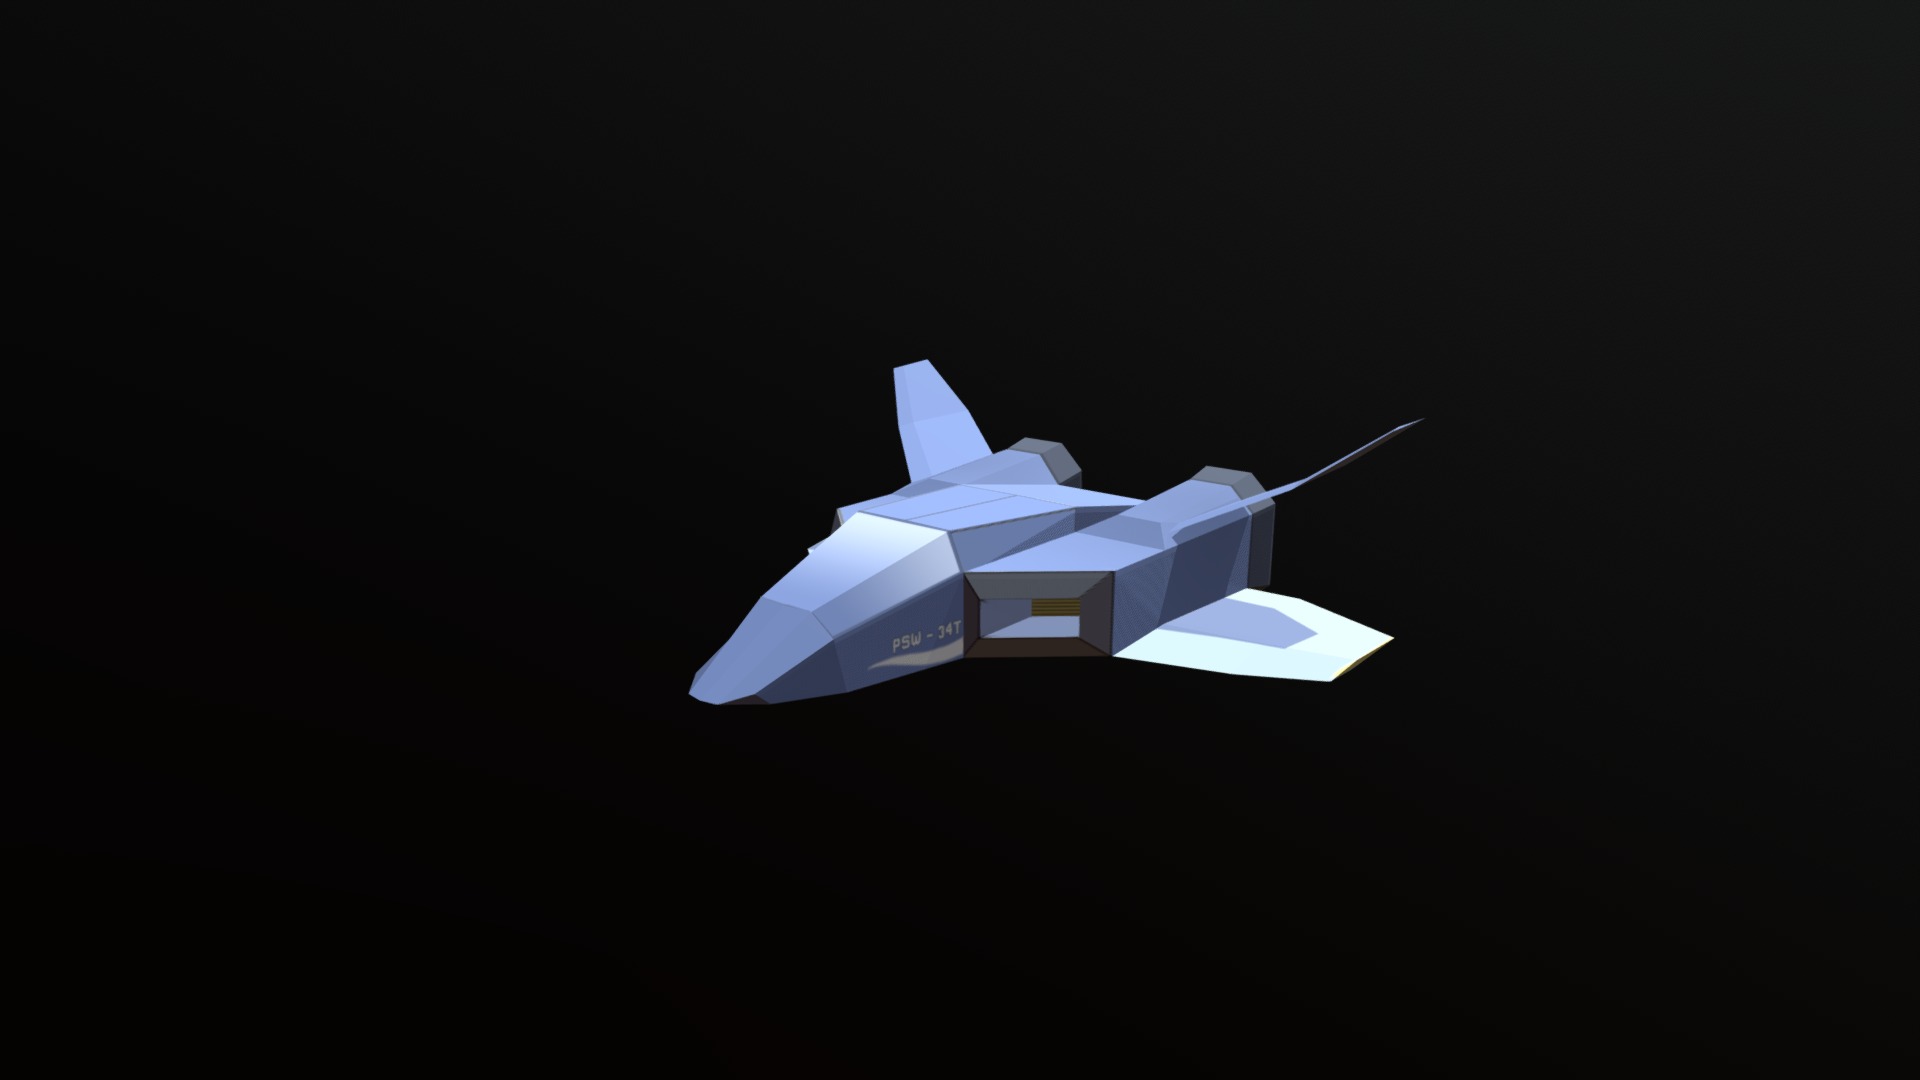 Simple low-poly space ship I modeled up as my first blender project! - PSW - 34T Flight Craft - 3D model by segger 3d model